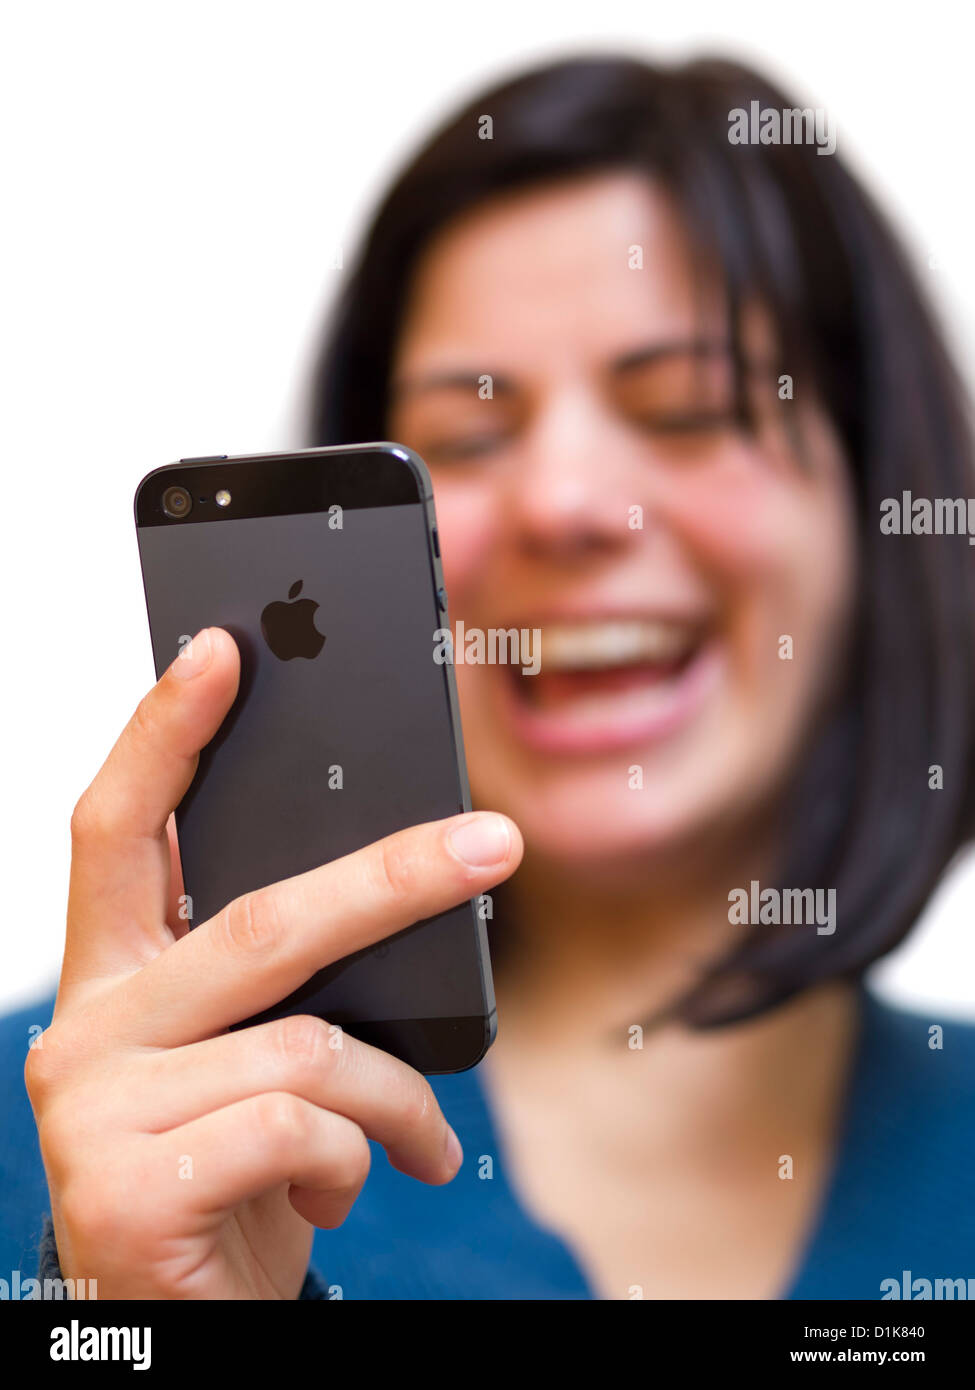 Smiling young woman holding an iPhone 5 Stock Photo